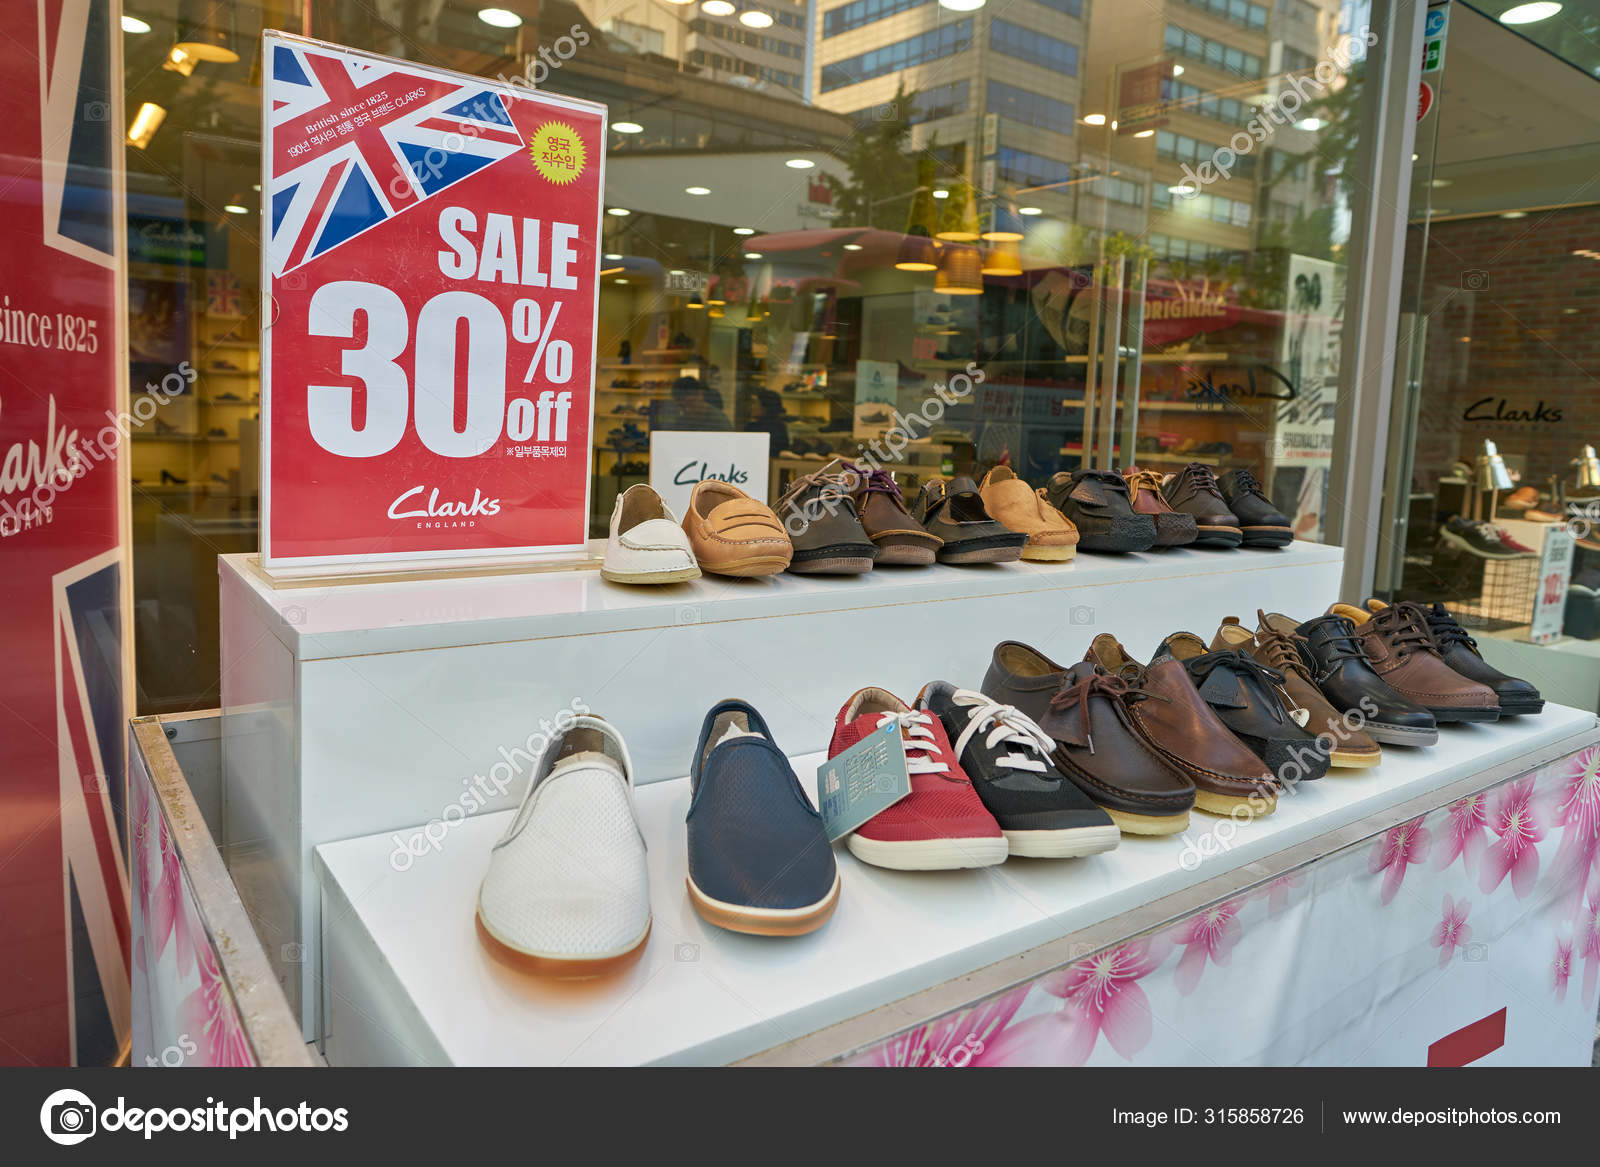 Clarks store in – Stock Editorial Photo © teamtime #315858726